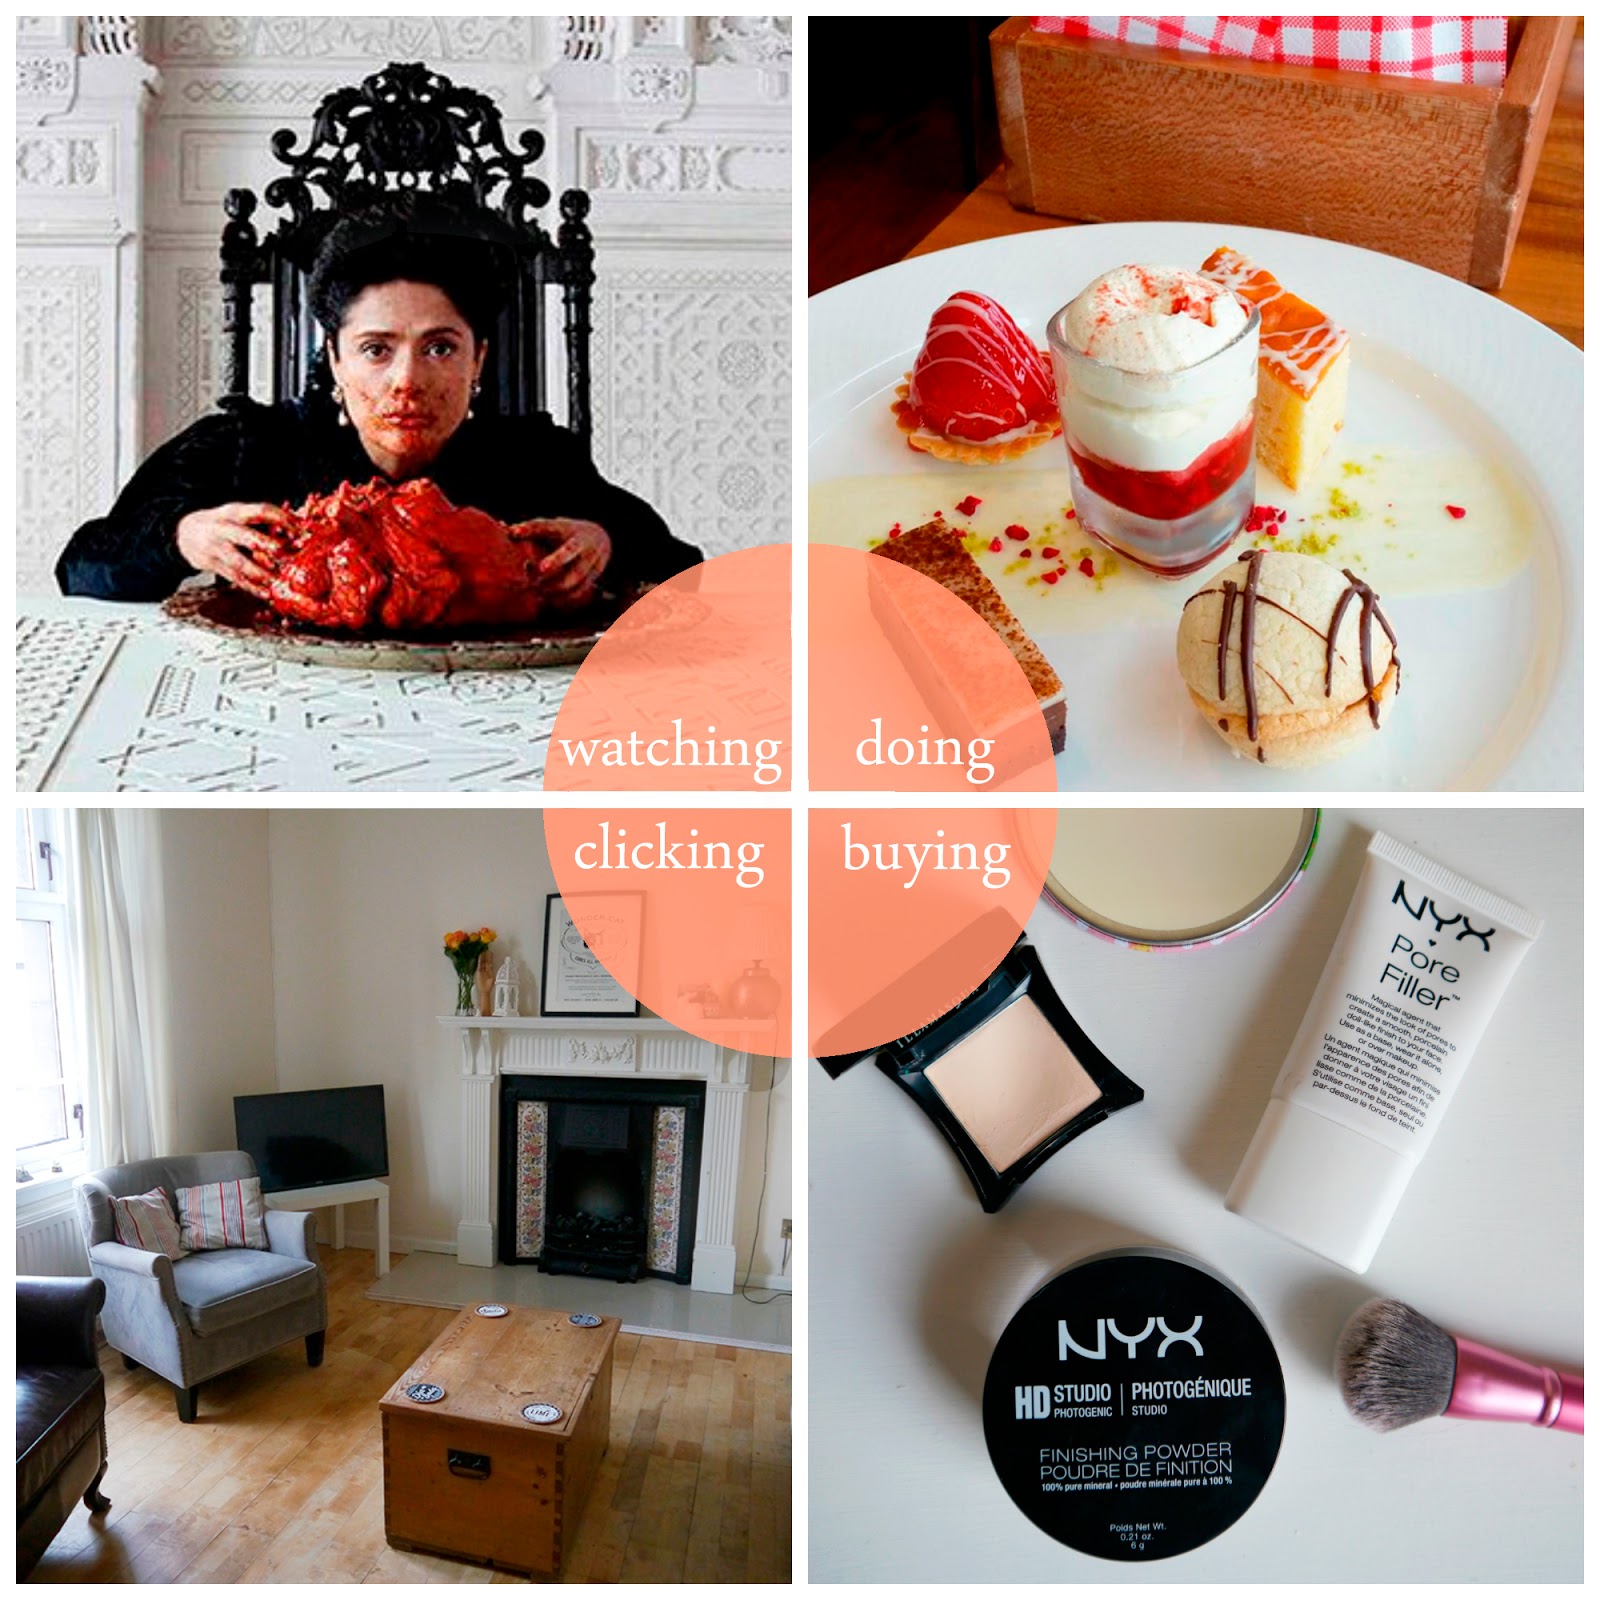 round up, best bits, July, Dundee blogger, Scottish blogger, Tale of Tales, DCA, Cine Sunday, Apex Dundee, Malmaison dundee, sister date, wedding, The Glue Fastory, NYX, Illamasqua, cruelty free make up, cruelty free beauty, spar room, flatmate search